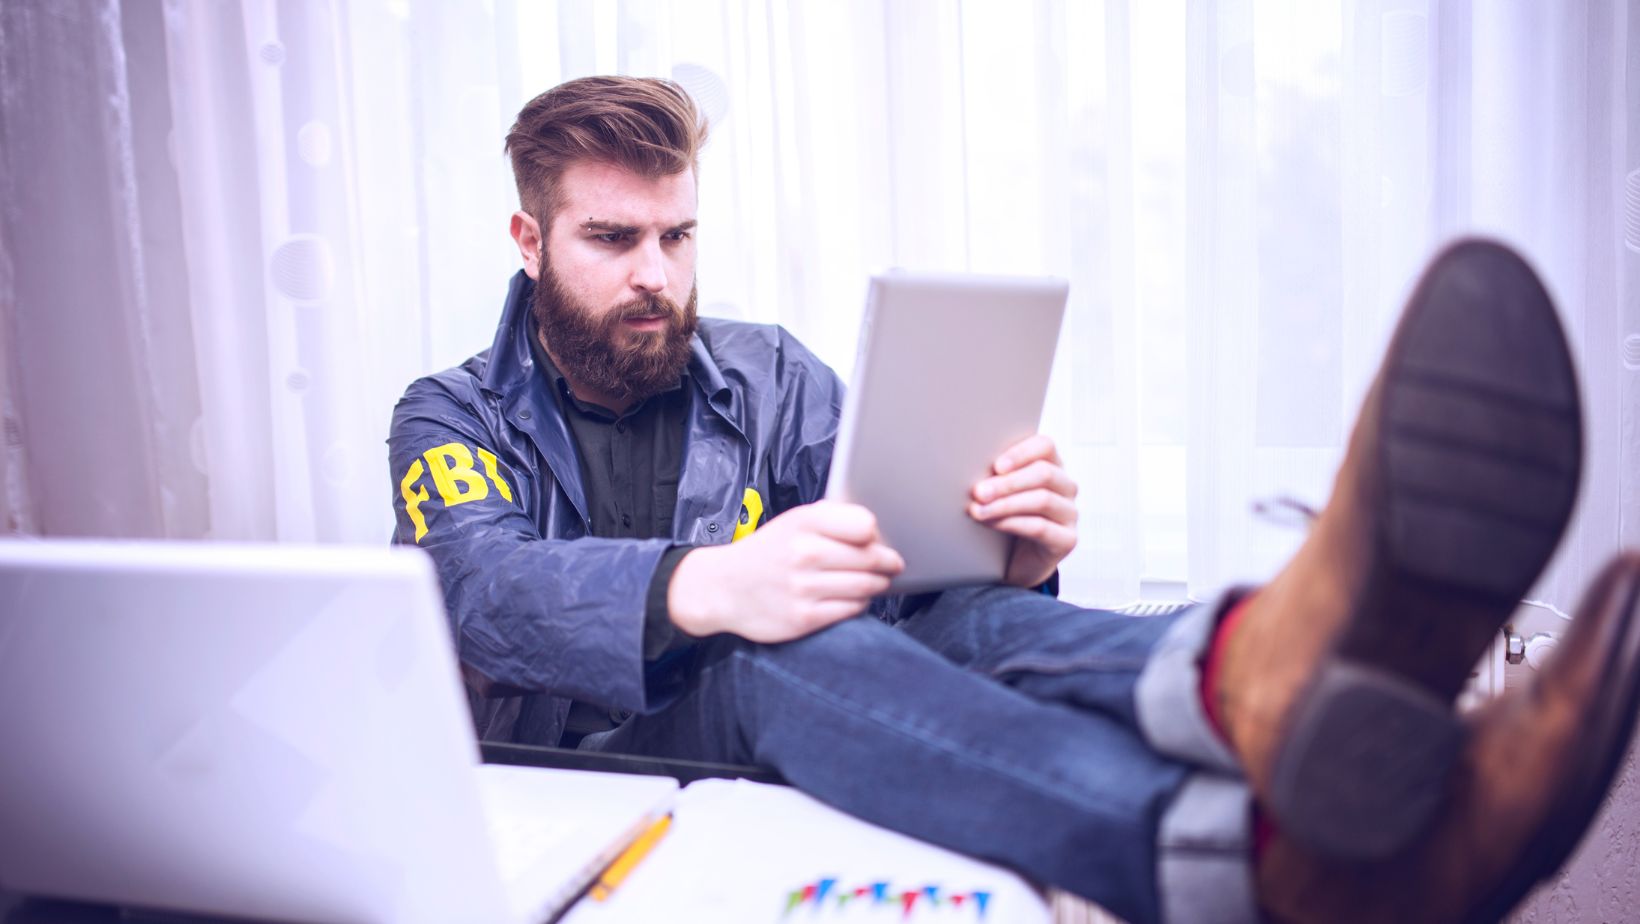 Trebco Tablet Fbi: Unveiling the Latest Tech Collaboration